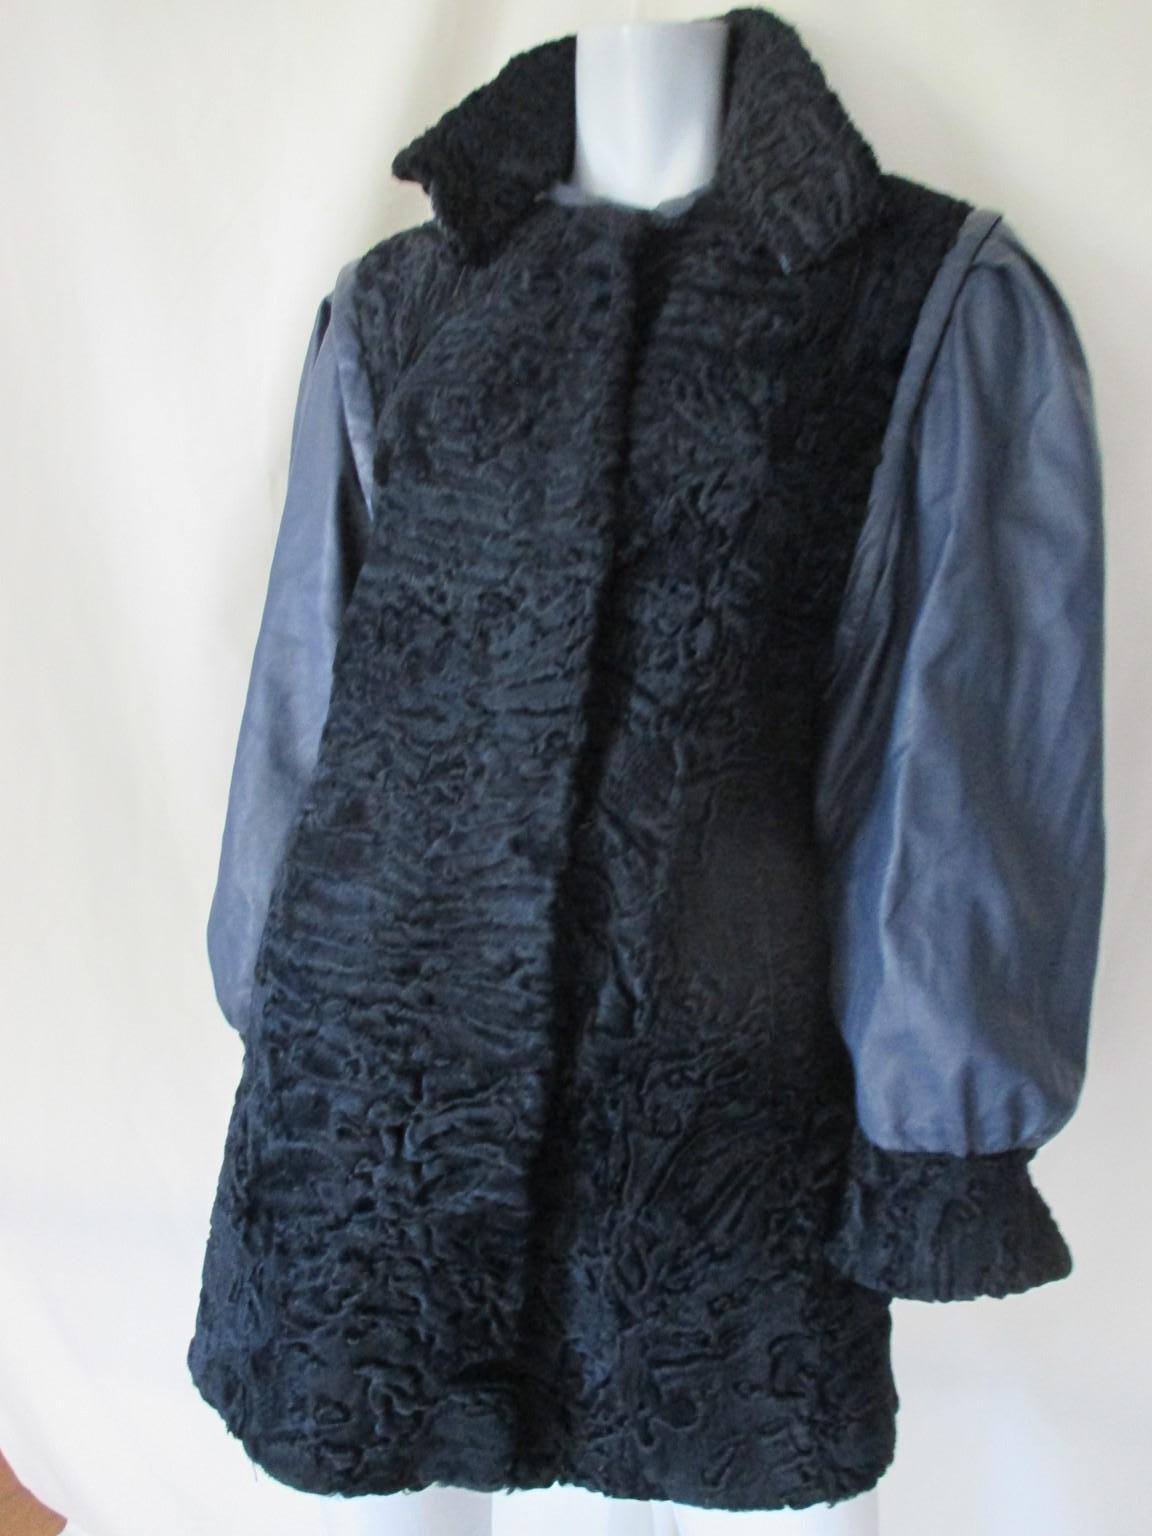  Blue Persian lamb/Astrakhan fur coat with detachable sleeves For Sale 1